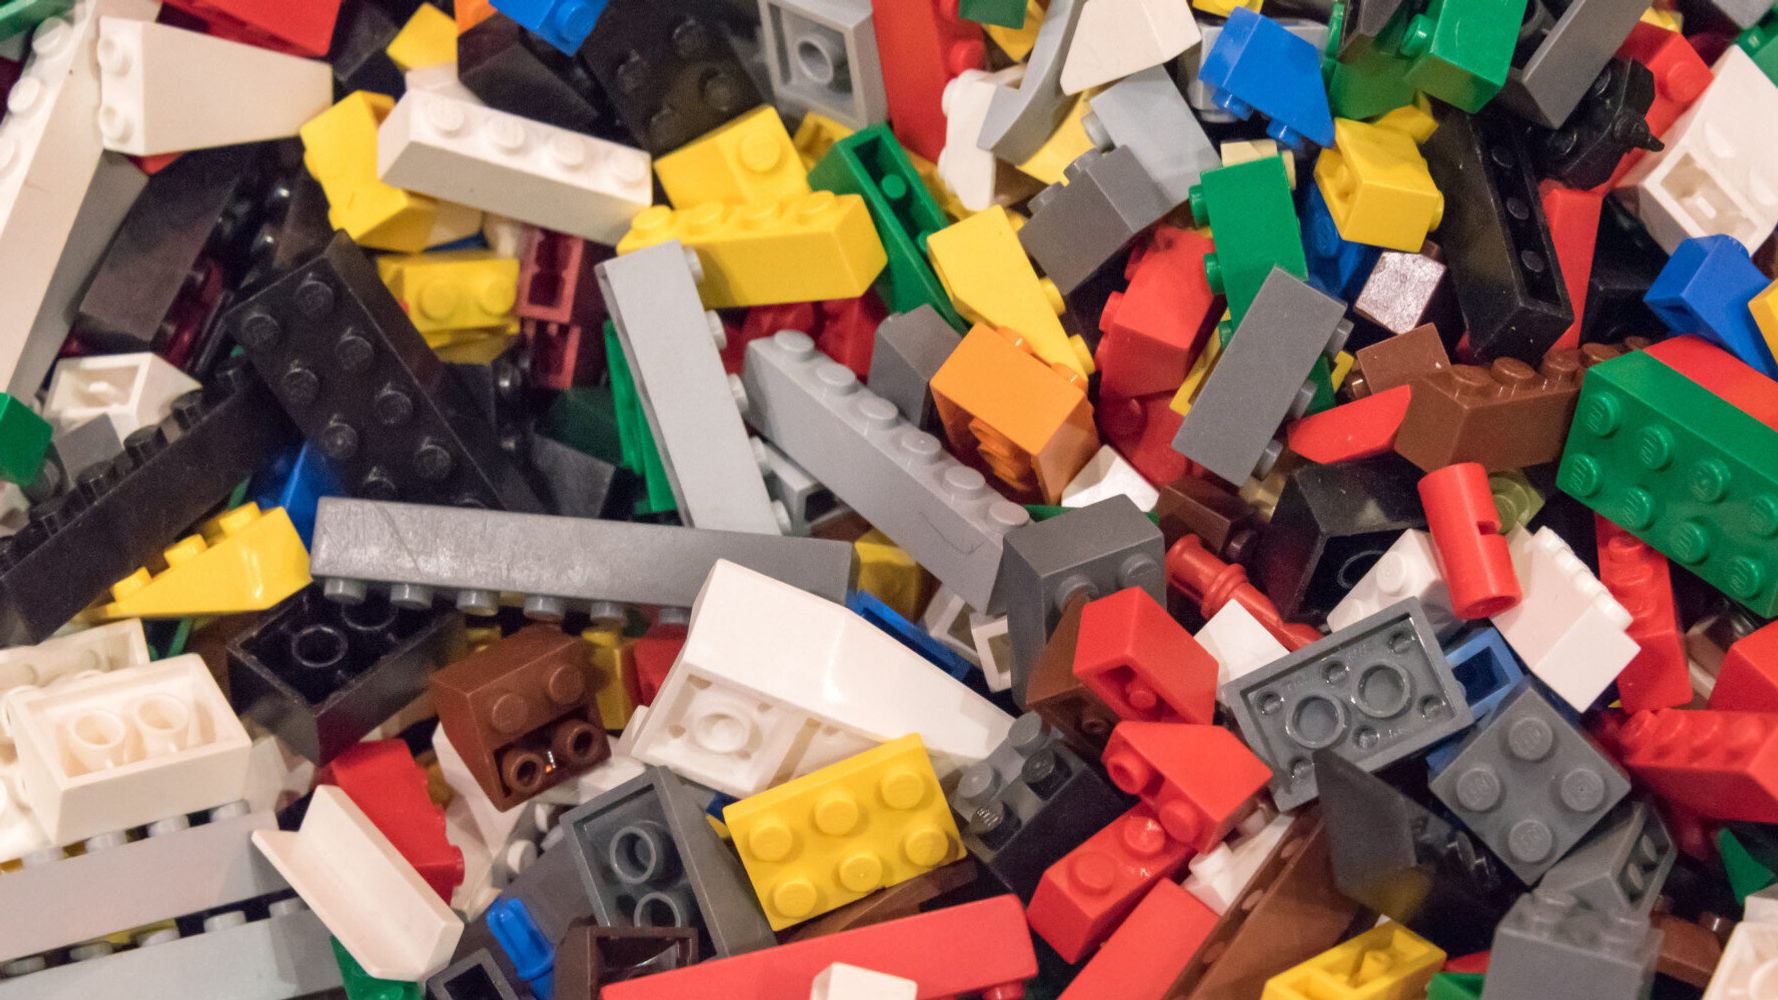 bjerg Grine Mundskyl Why Stepping On A Lego Brick Hurts Your Feet So Much | HuffPost UK Tech